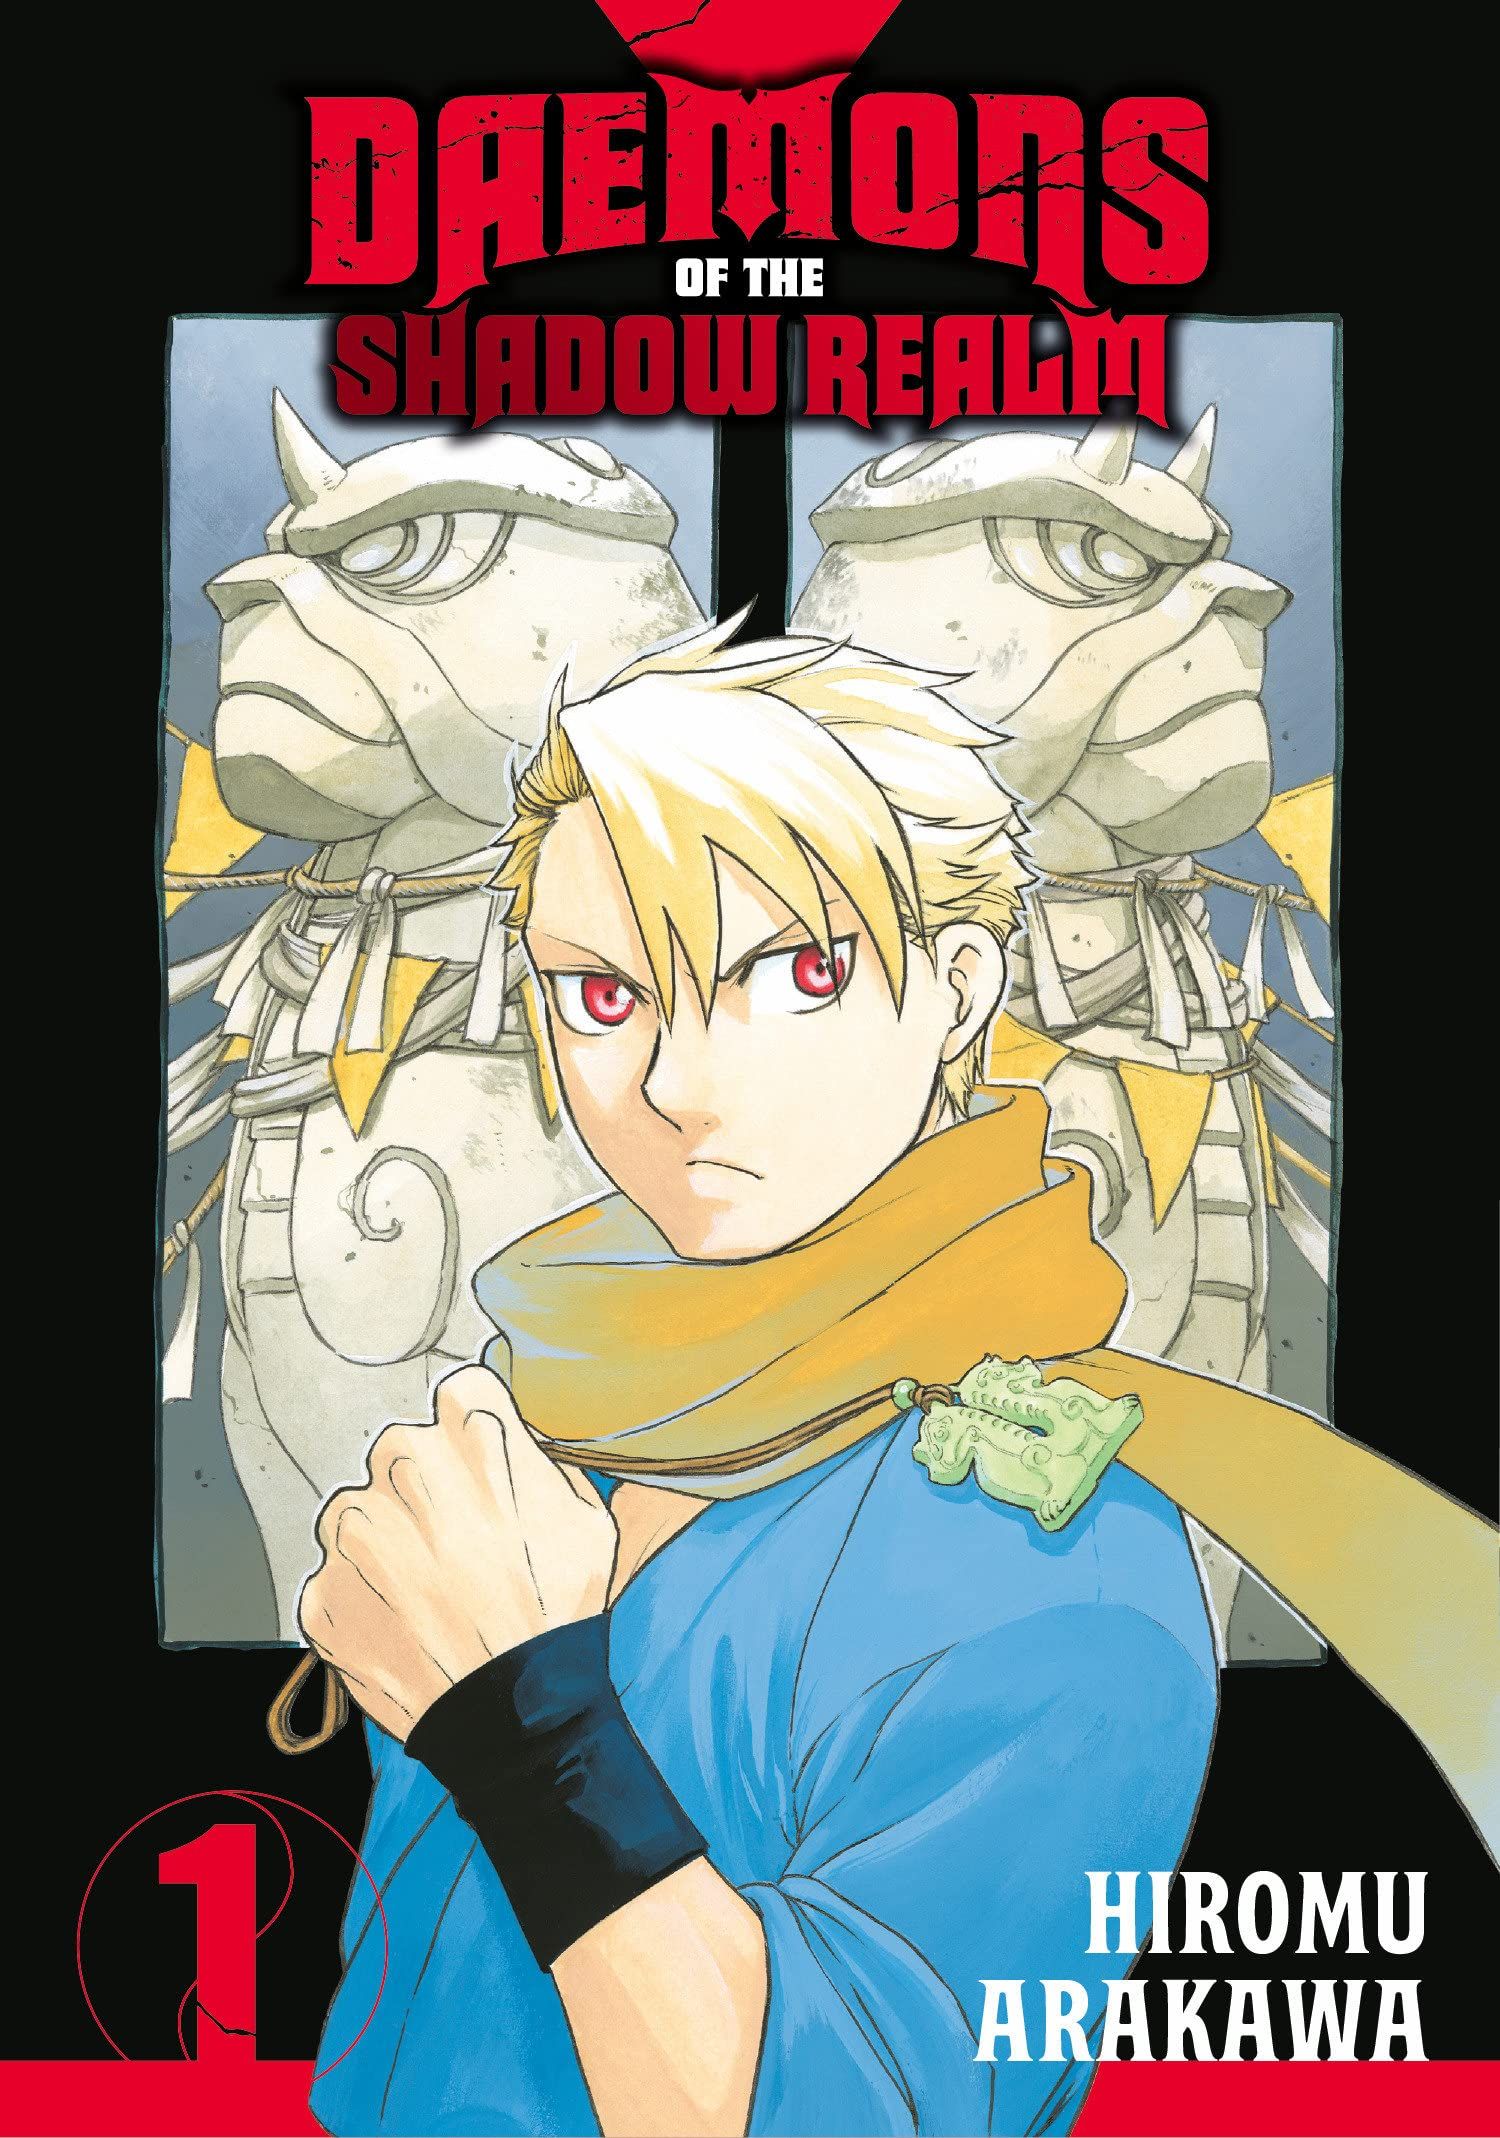 Daemons of the Shadow Realm by Hiromu Arakawa cover